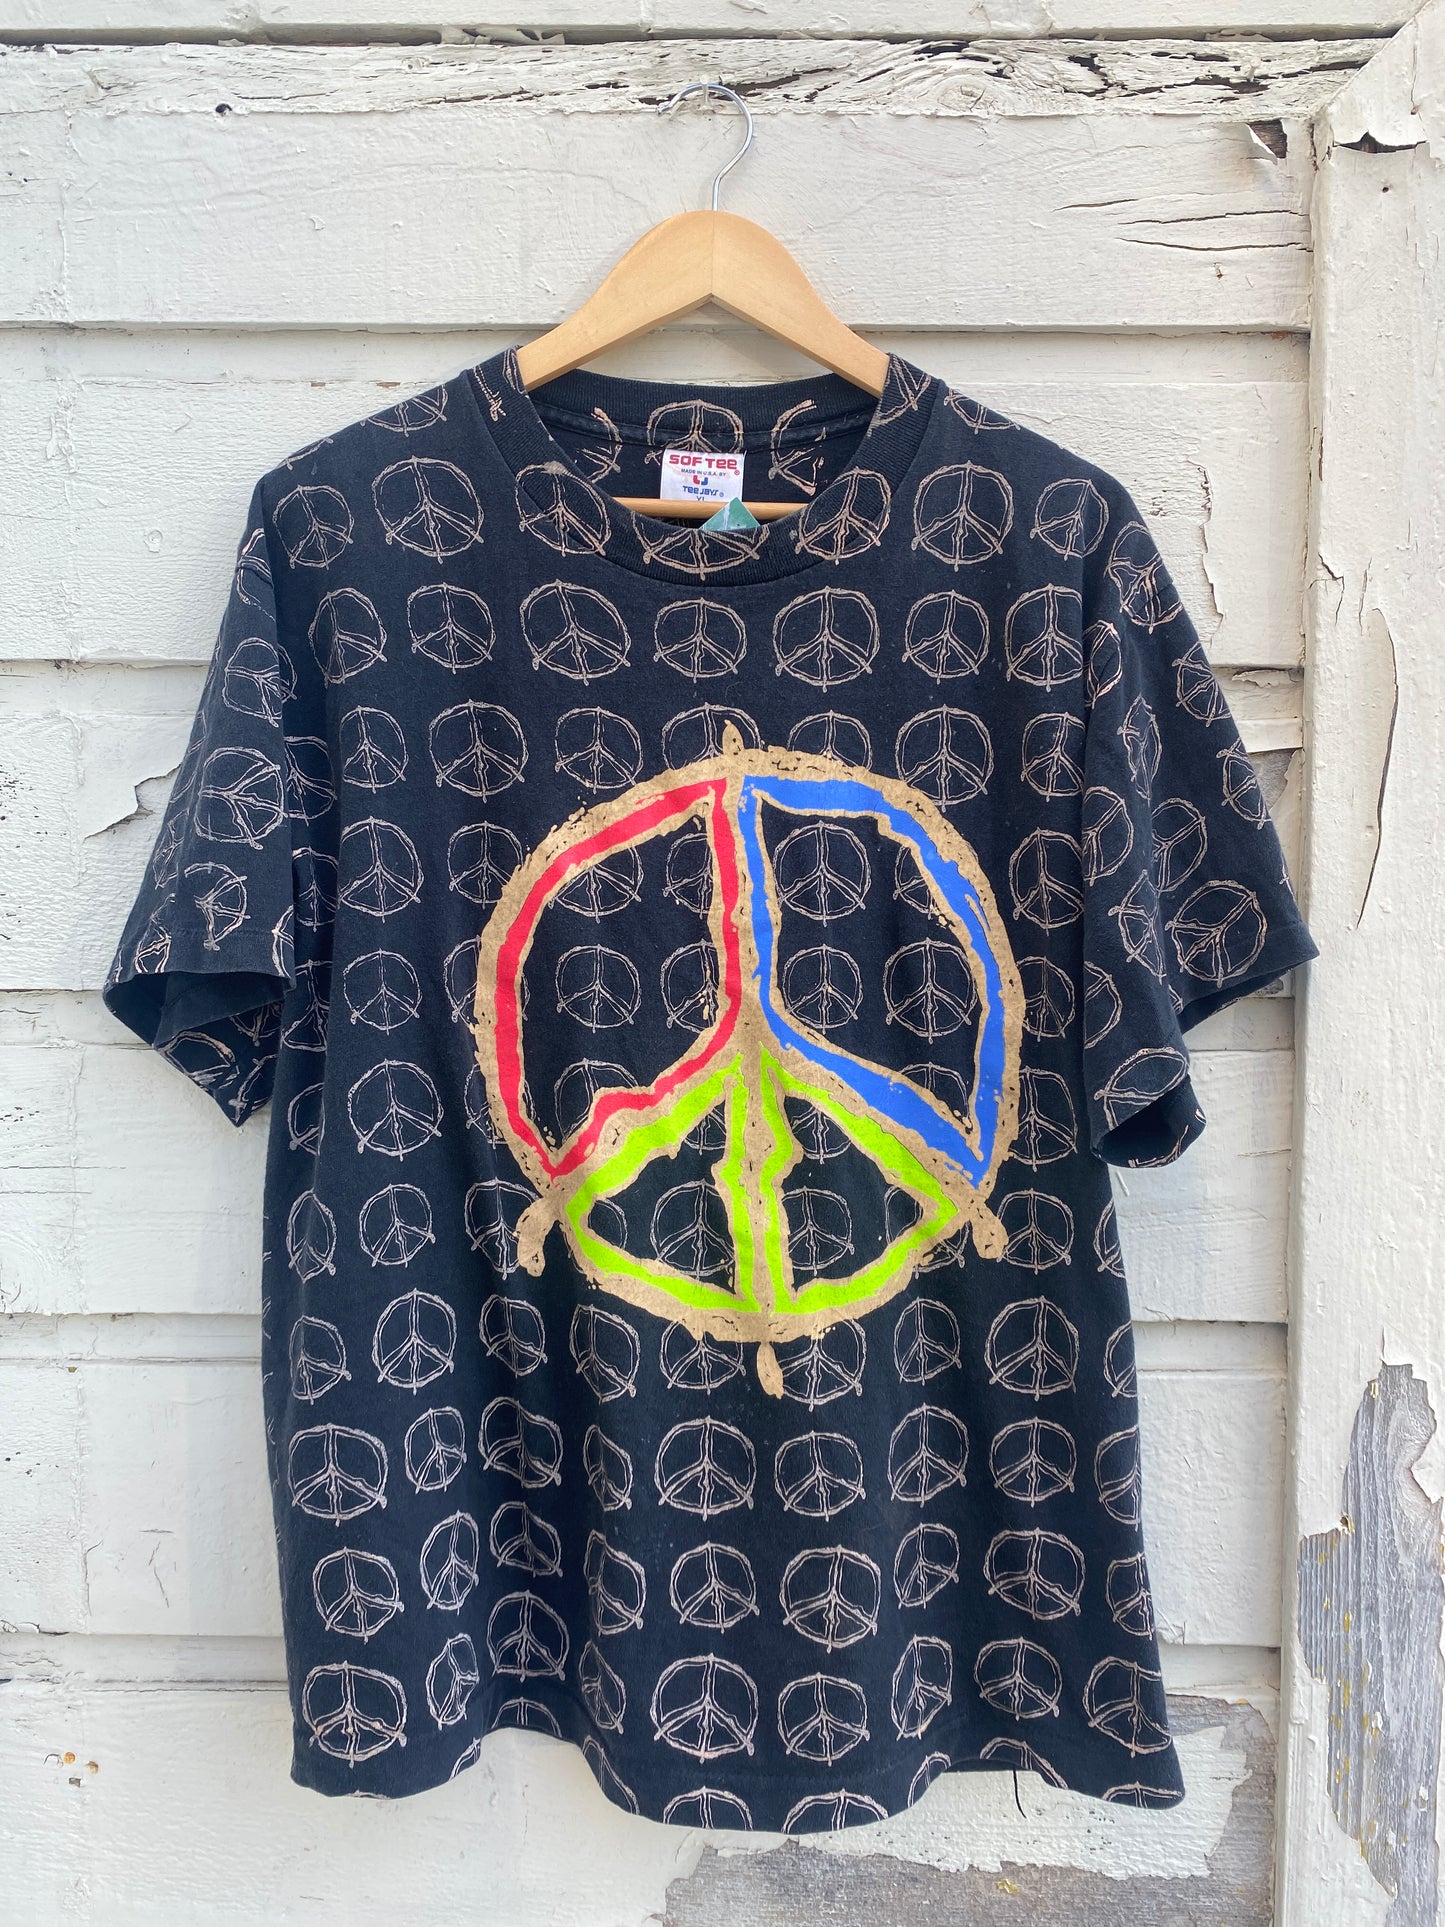 Vintage All Over Print Peace Tshirt Large